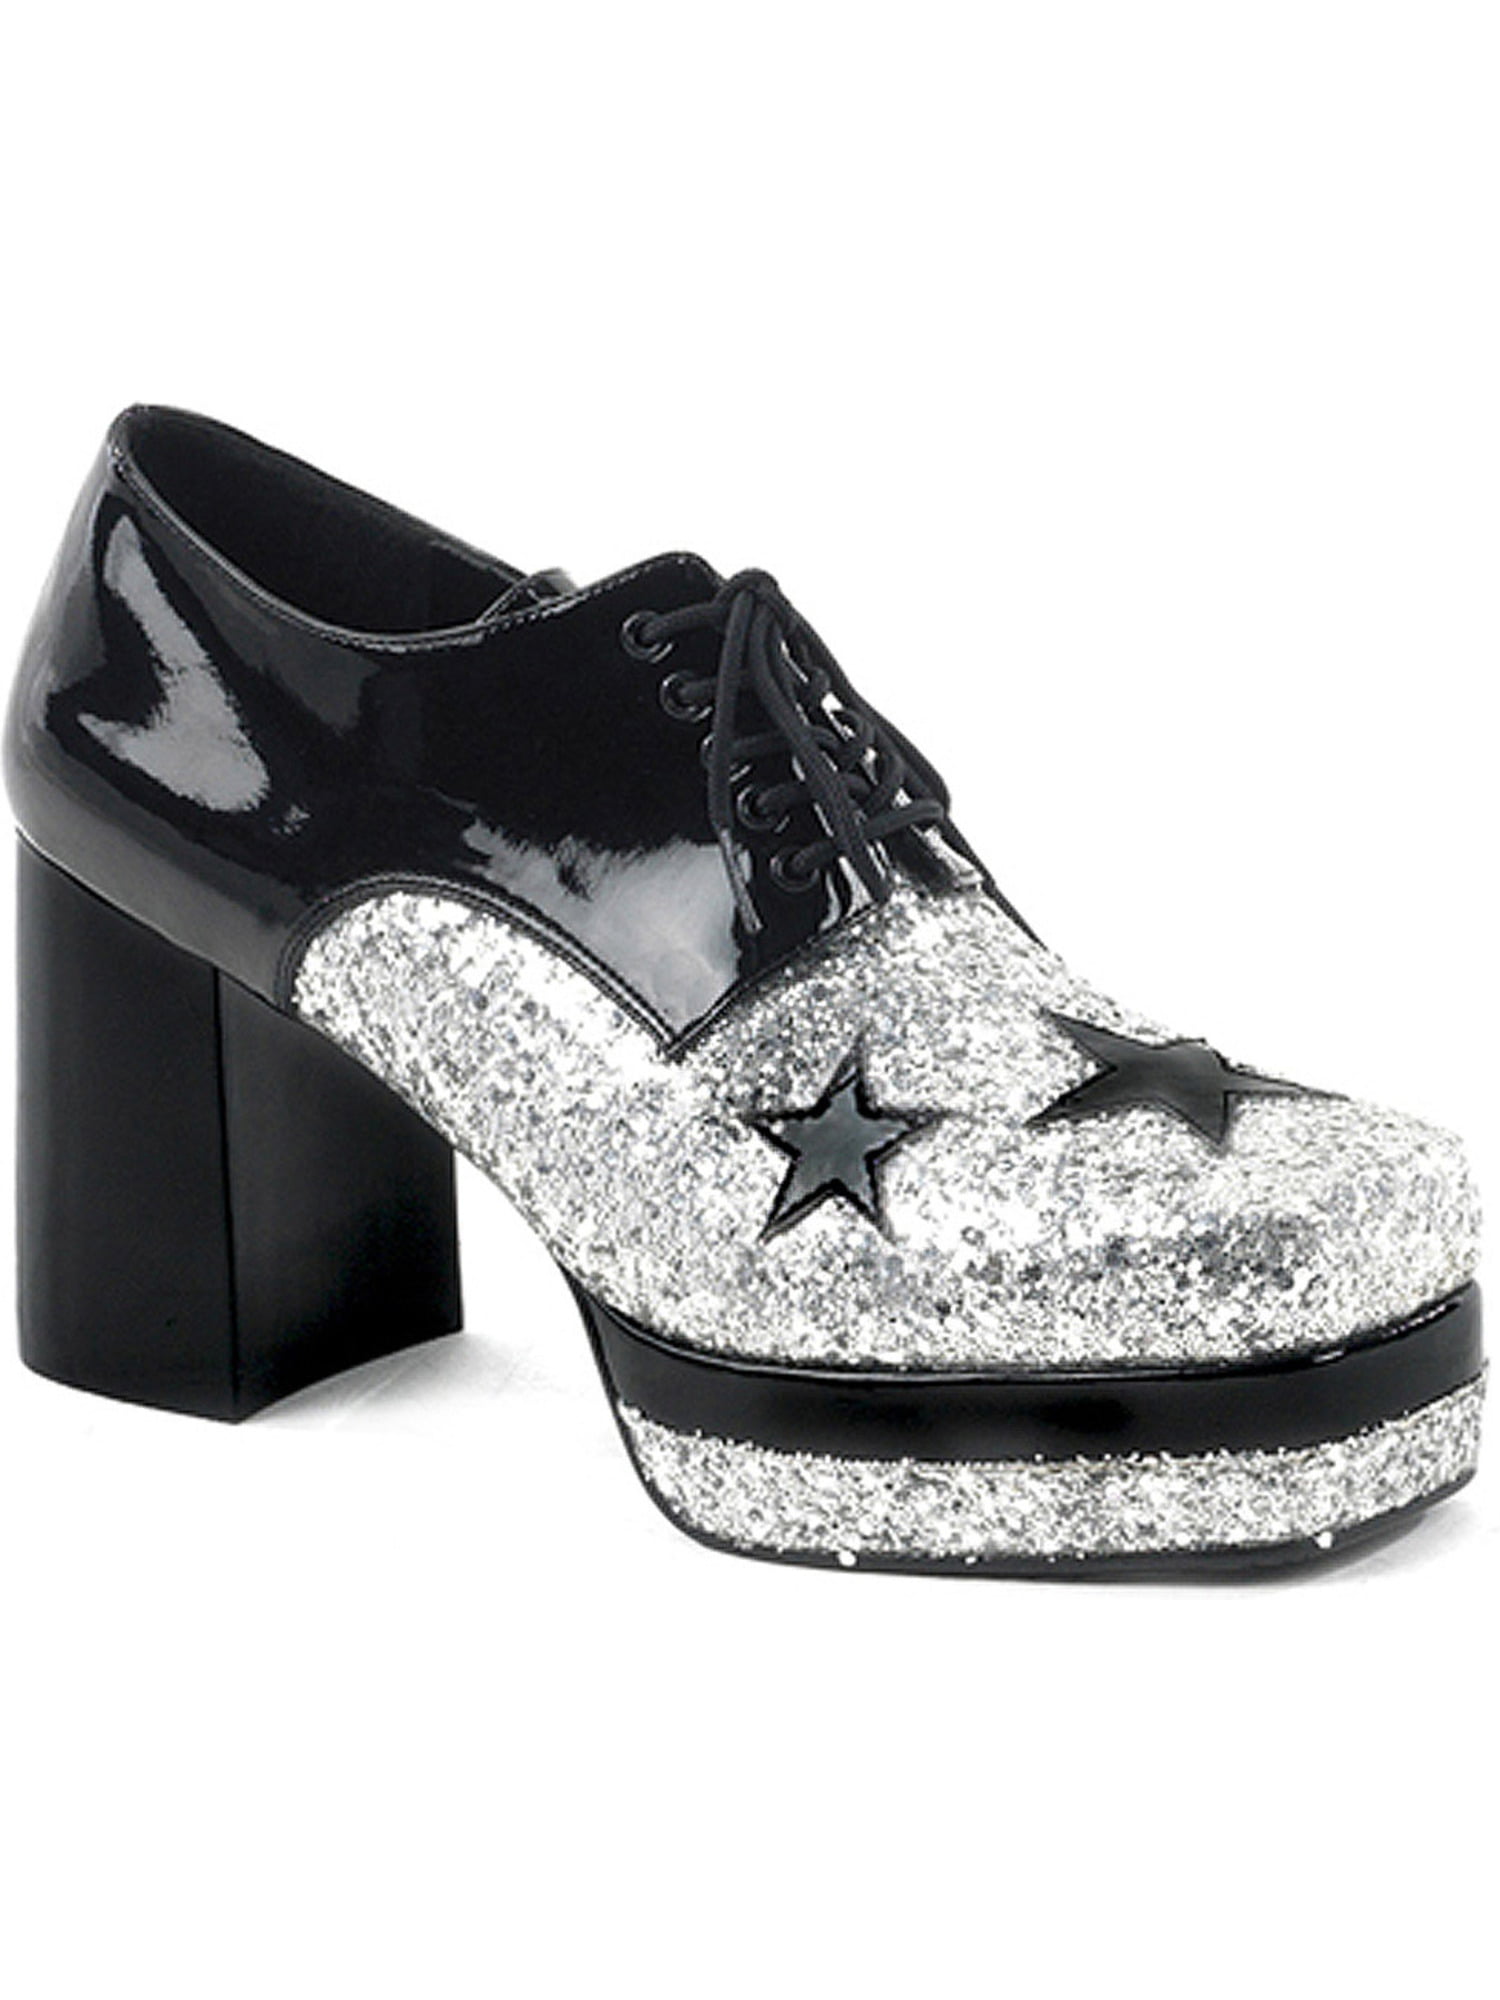 black and silver glitter shoes